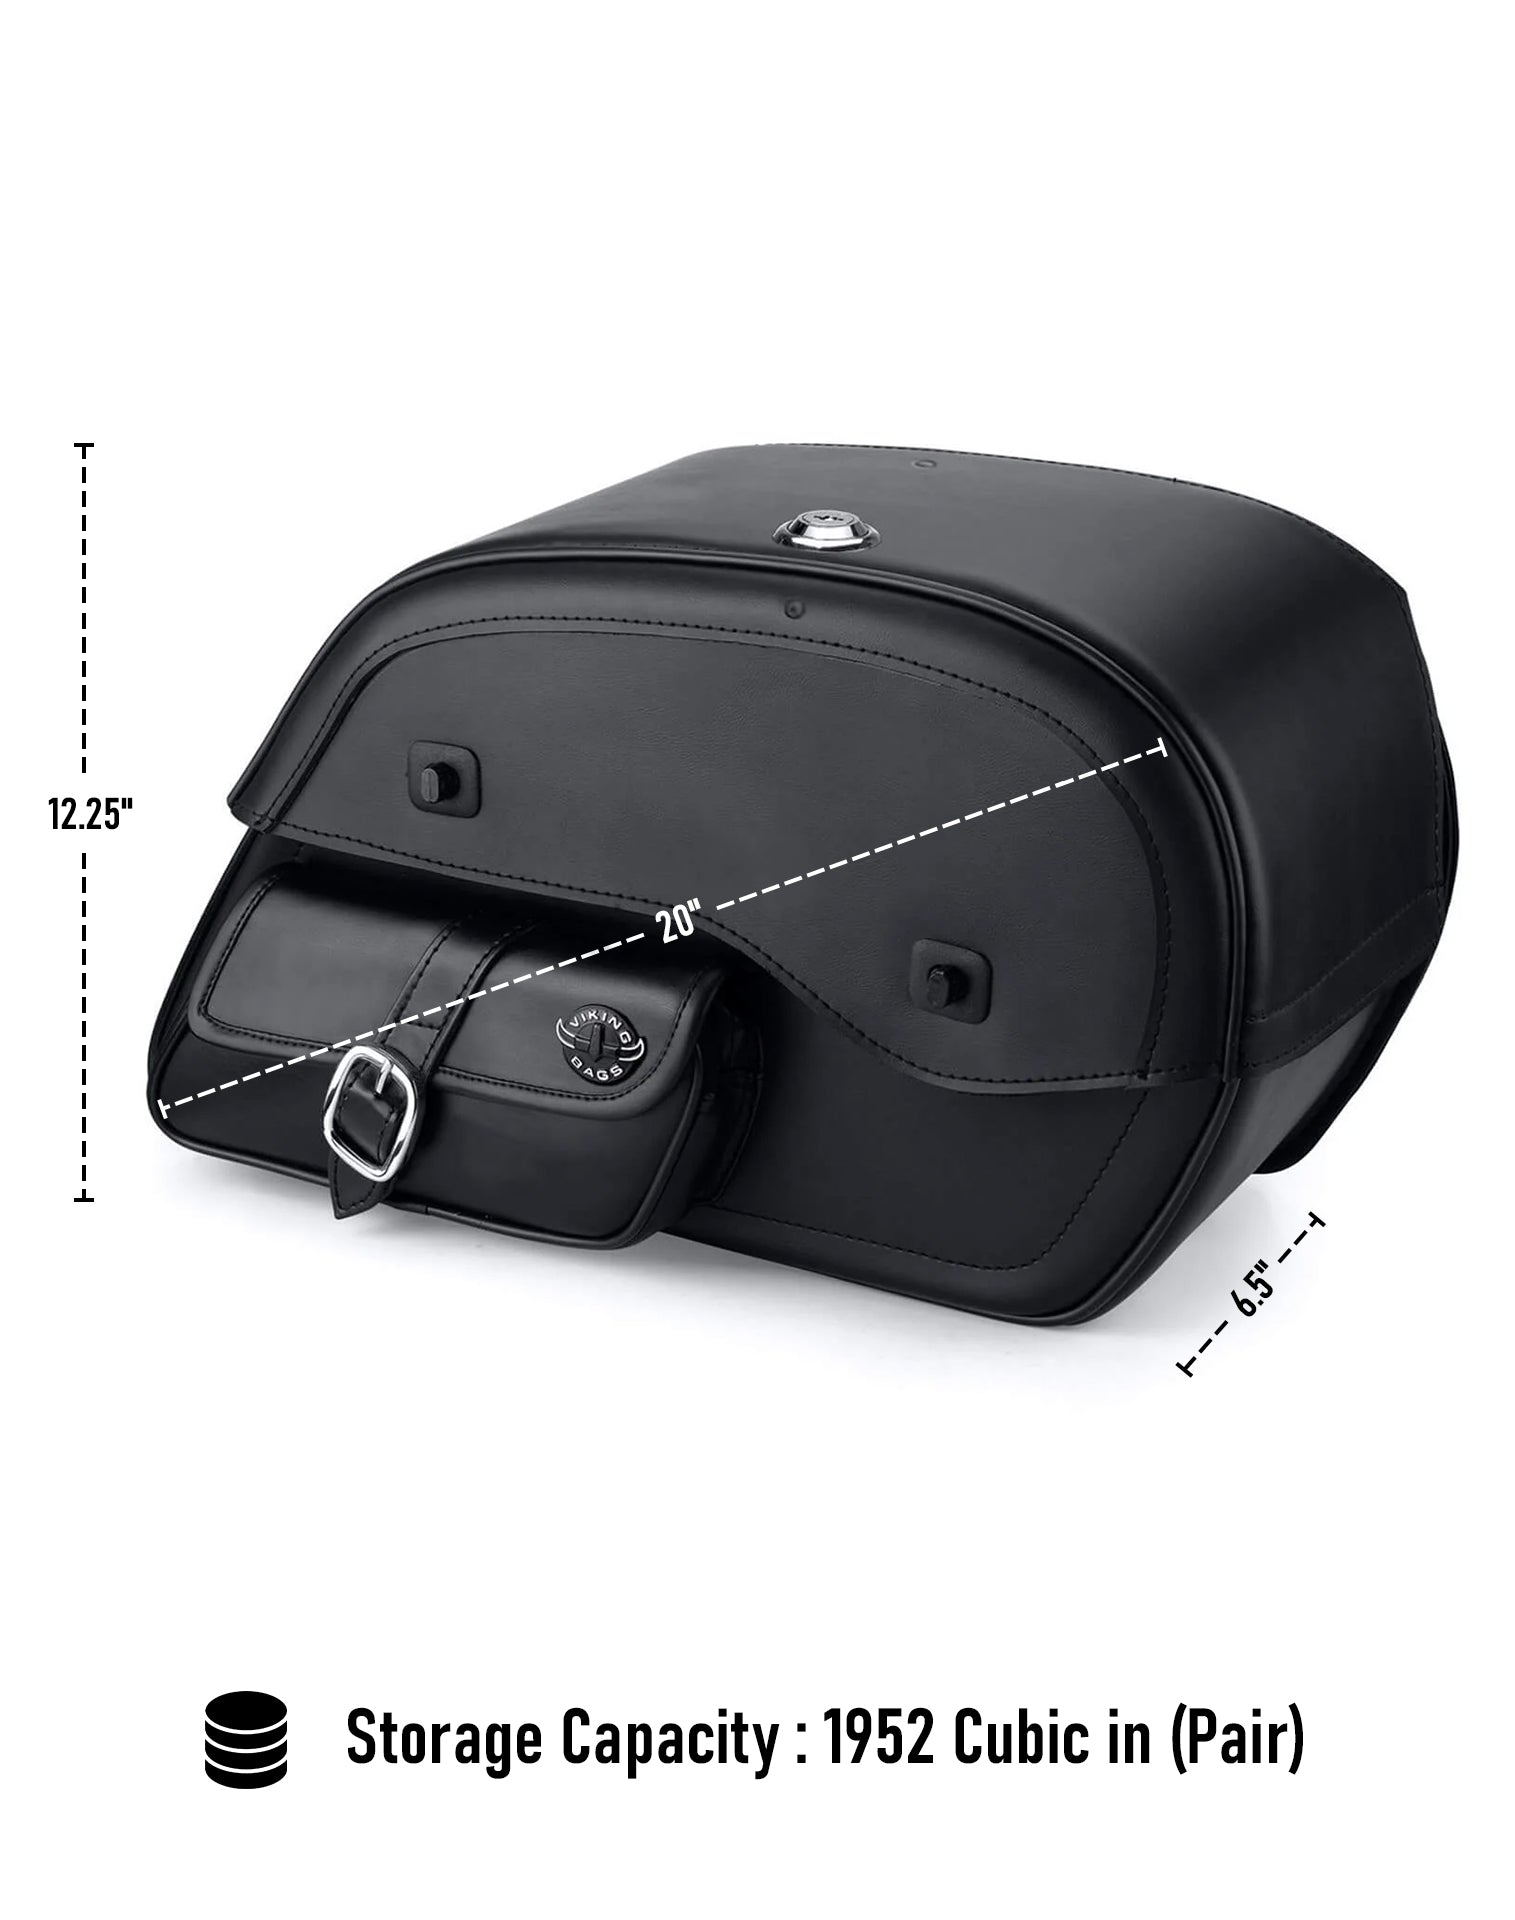 Viking Essential Side Pocket Large Leather Motorcycle Saddlebags For Harley Softail Breakout Fxsb Can Store Your Ridings Gears